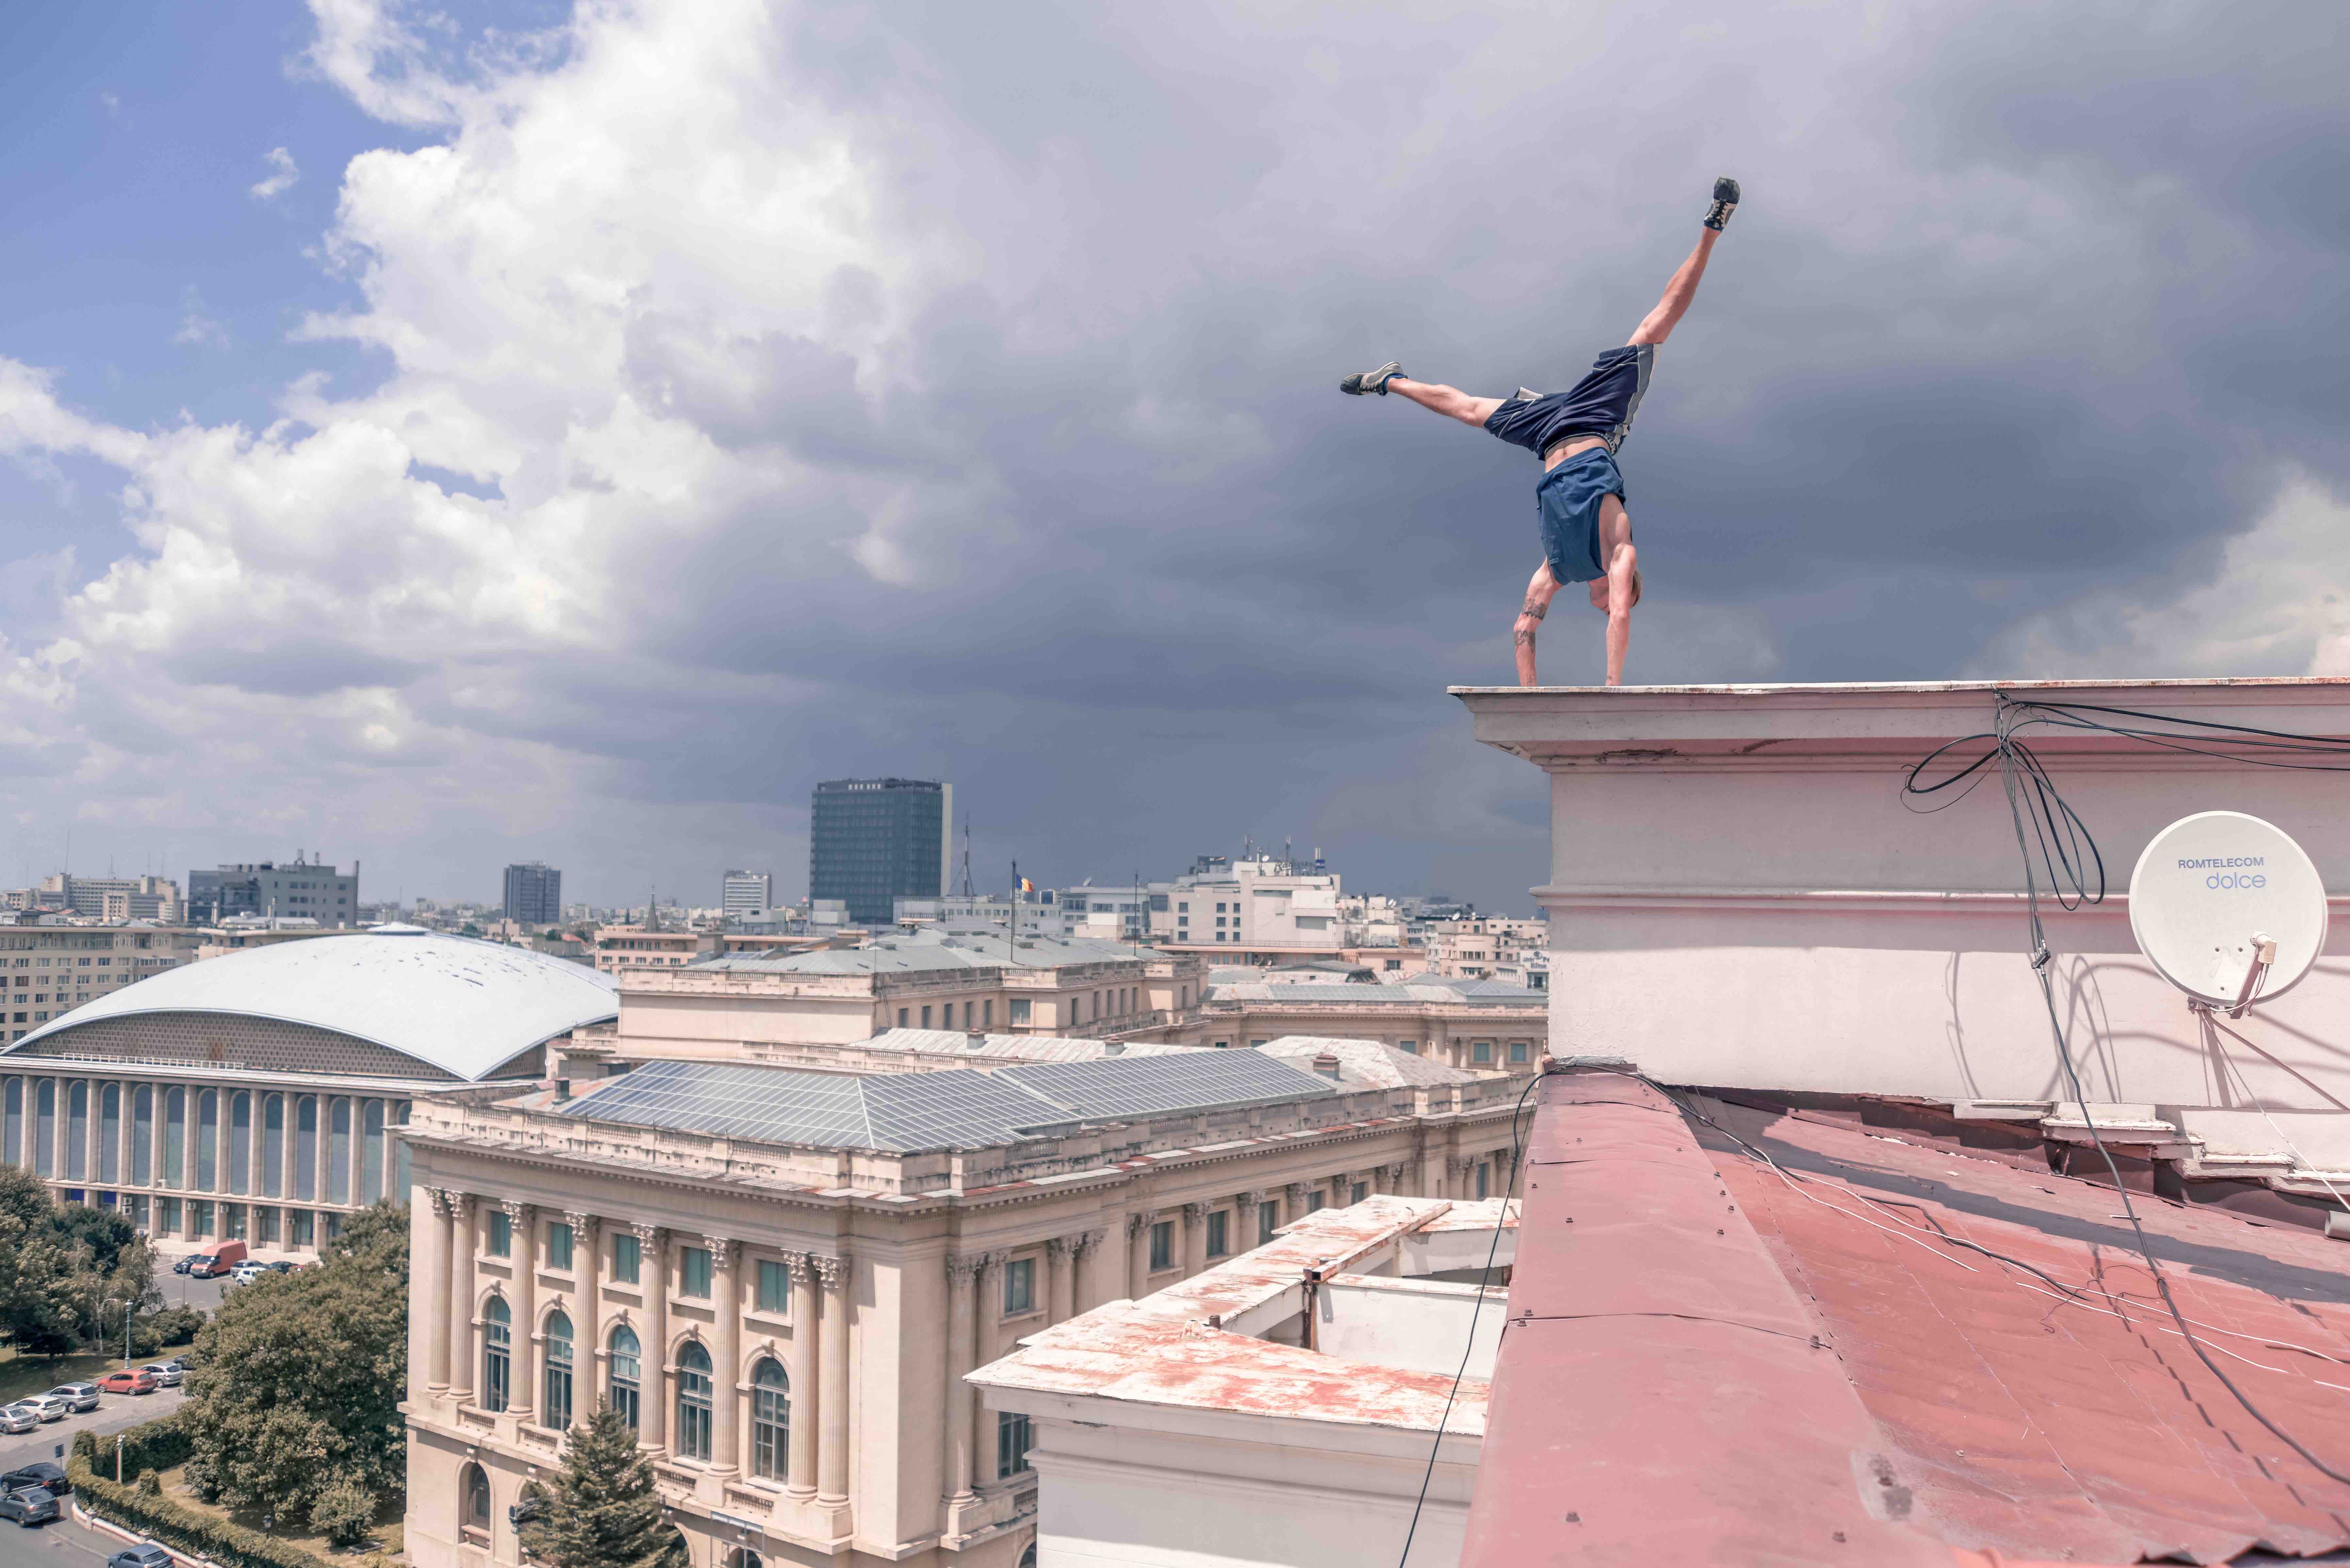 FREE-RUNNING, INTERACTIVE SHOWS, ACROBATIC FEATS, JUGGLING, PARADE AND CONTEMPORARY DANCE AT B-FIT IN THE STREET!, THE INTERNATIONAL STREET THEATER BUCHAREST